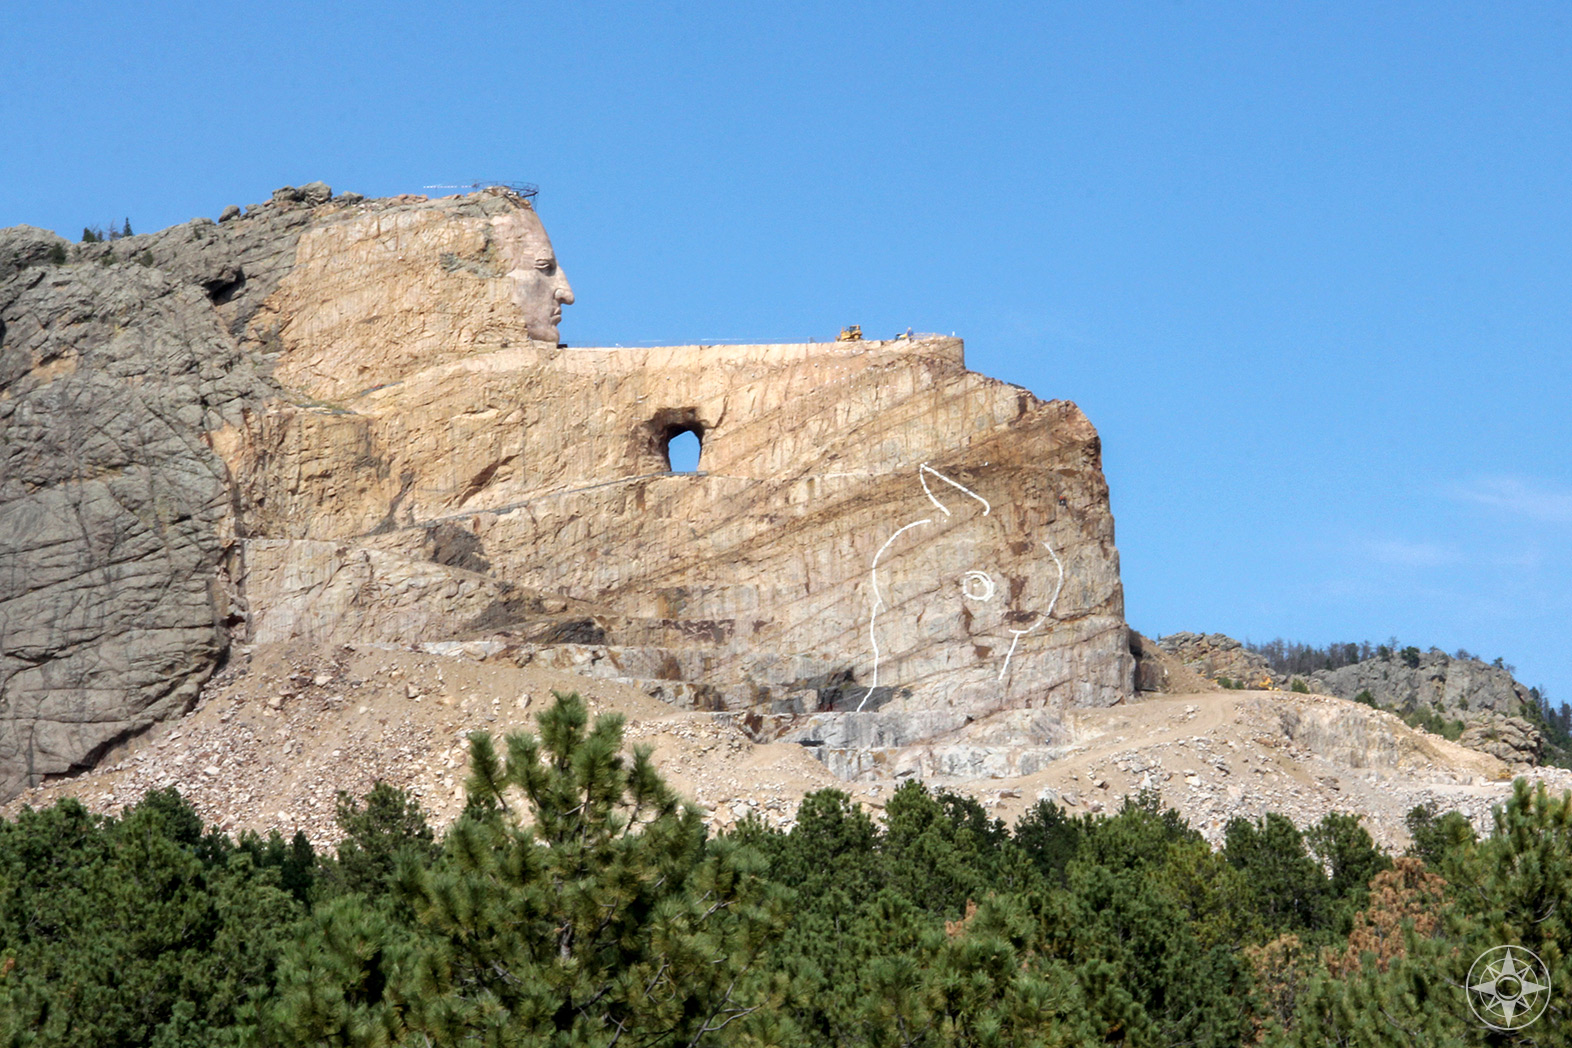 Crazy Horse Memorial, North American Indian and horse sculpture, world's largest mountain monument, Black Hills, South Dakota